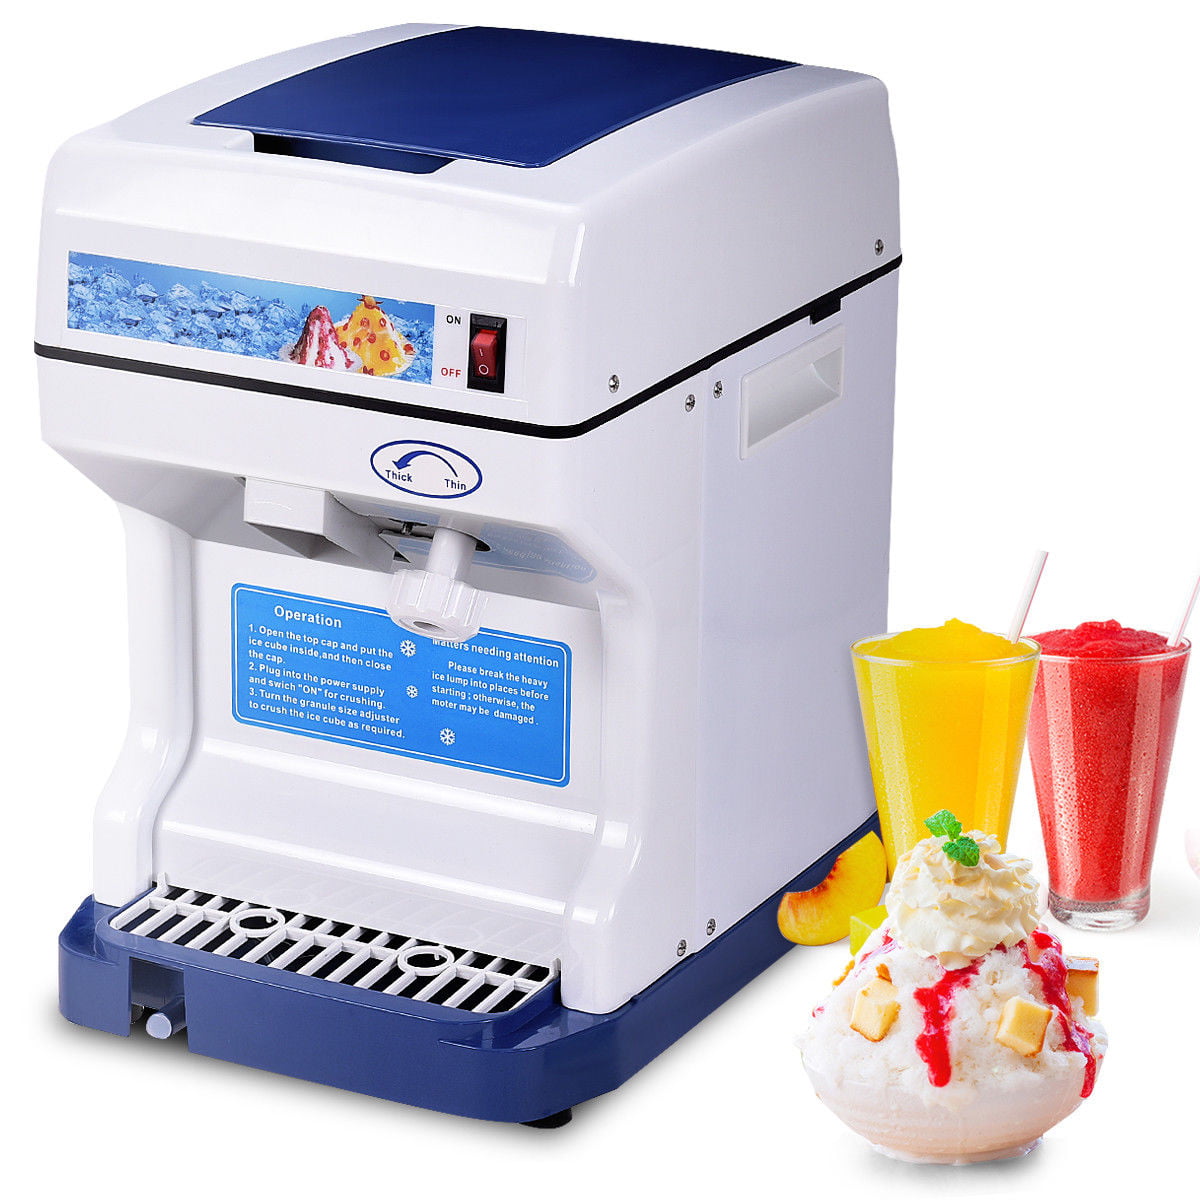 Sanven Ice Shaver Ice Crusher Shaved Electric Snow Cone Maker Ice Shaver Machine 440Lb/Hr Snow Cone Maker Machine 